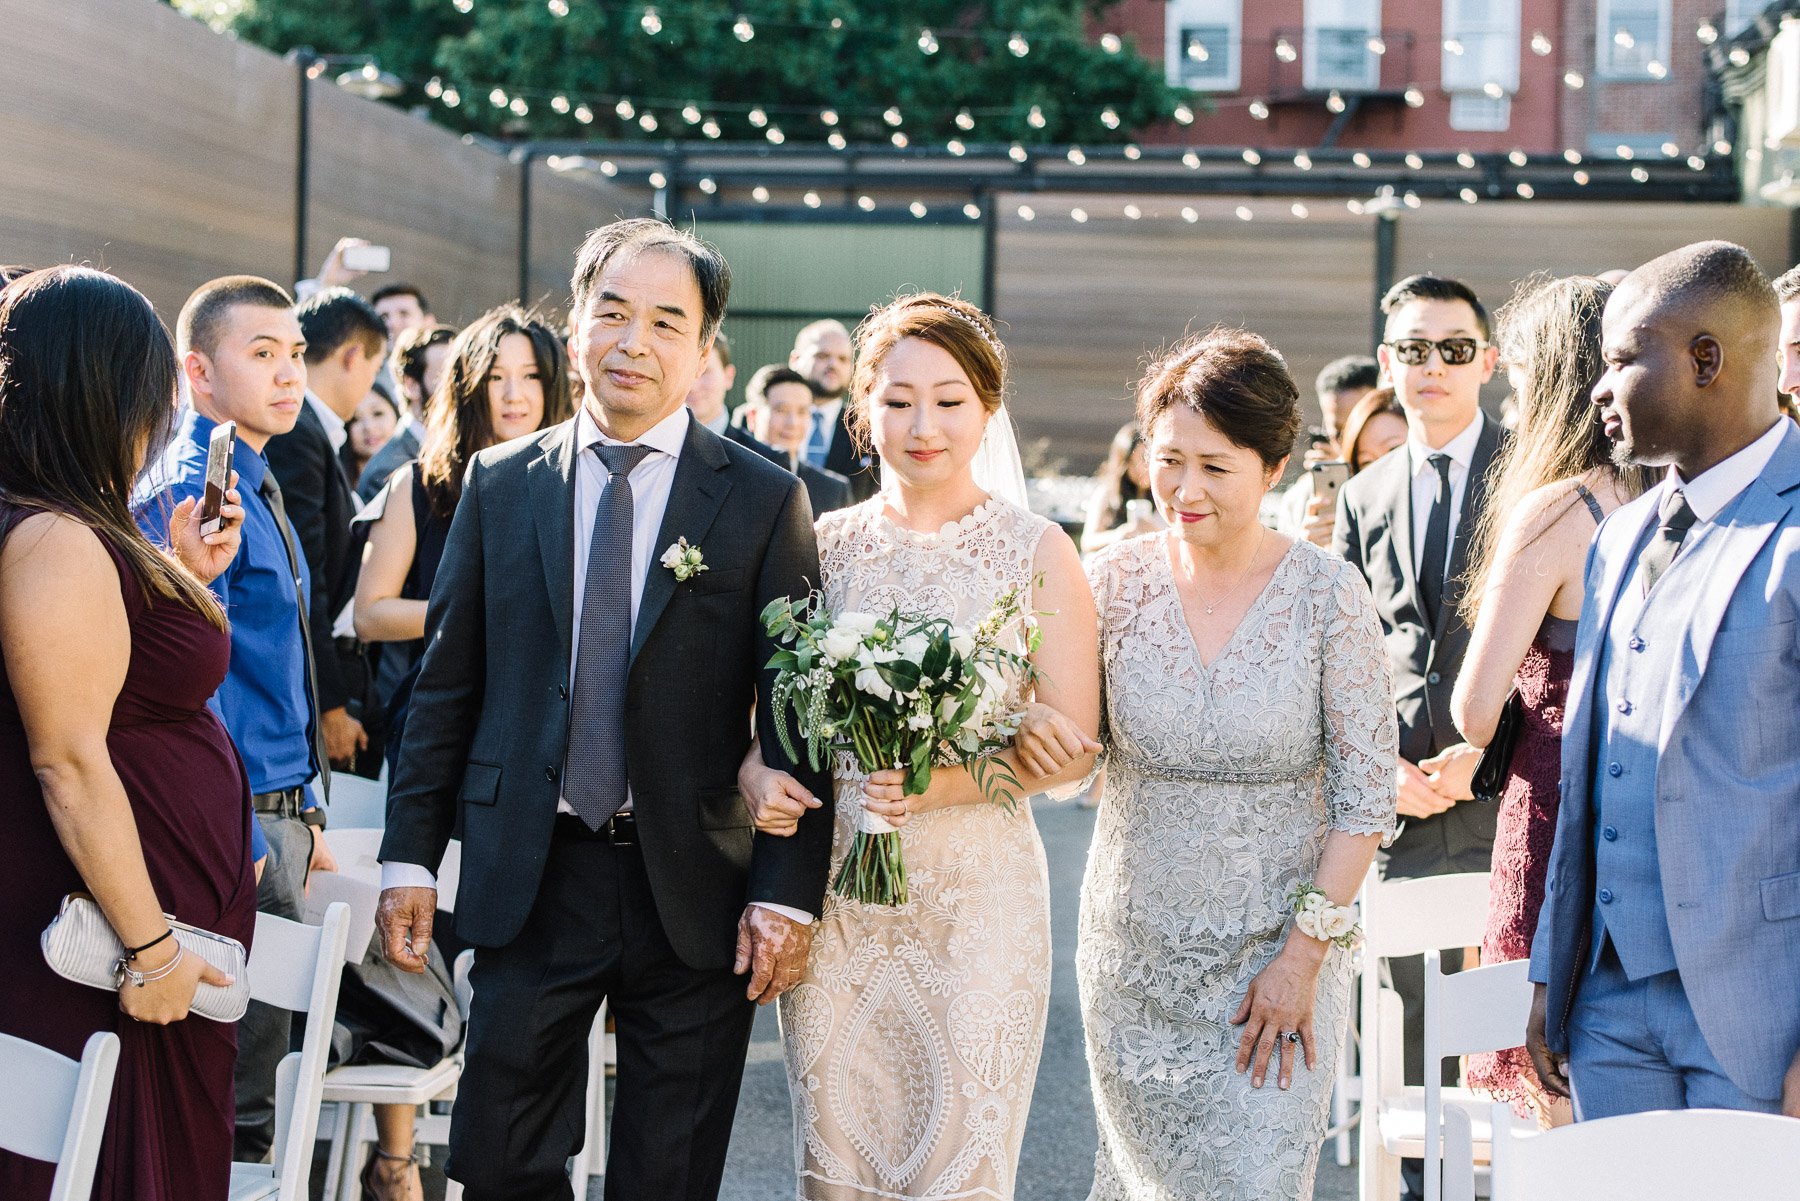 The Green Building Outdoor Ceremony